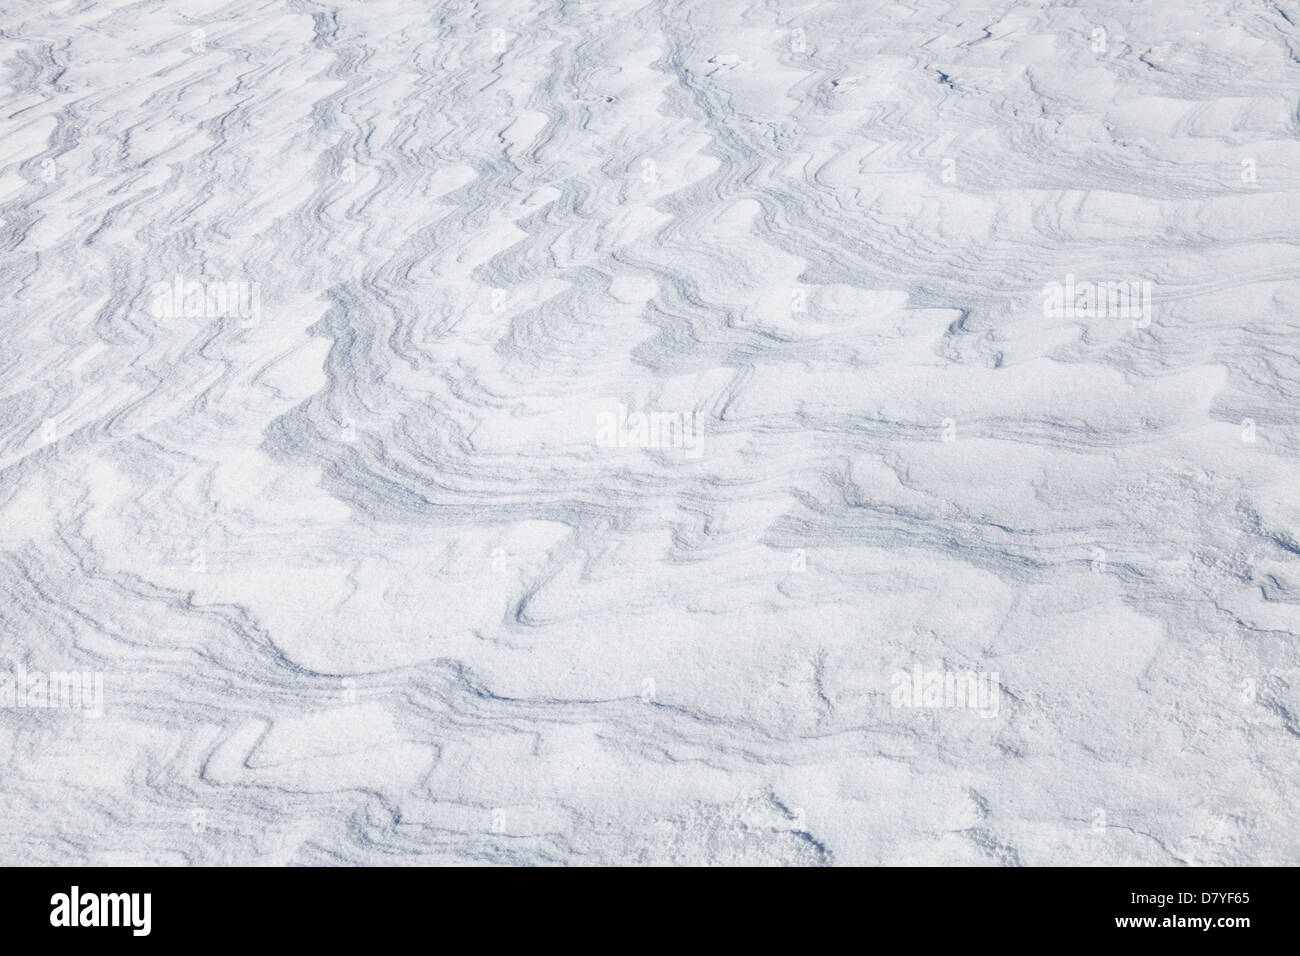 Abstract background texture of snowdrift with nice curved shadows Stock Photo